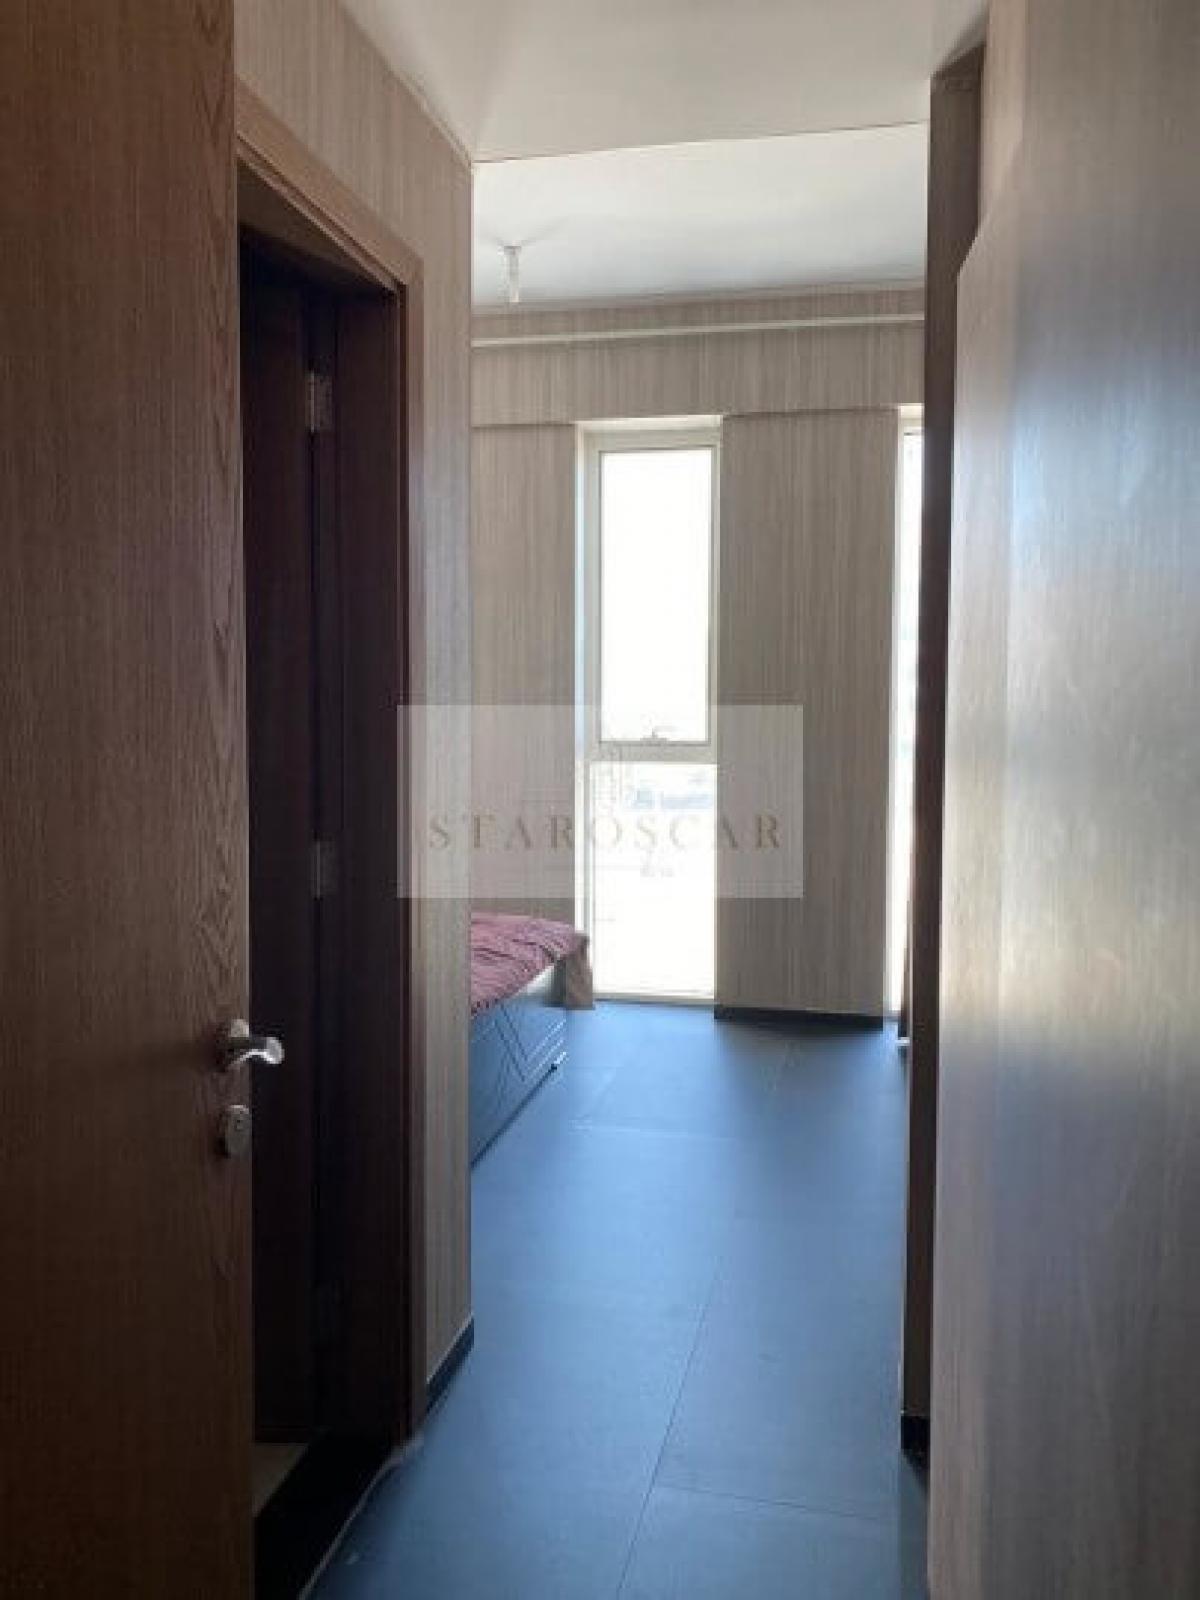 Picture of Apartment For Rent in Al Nahyan Camp, Abu Dhabi, United Arab Emirates